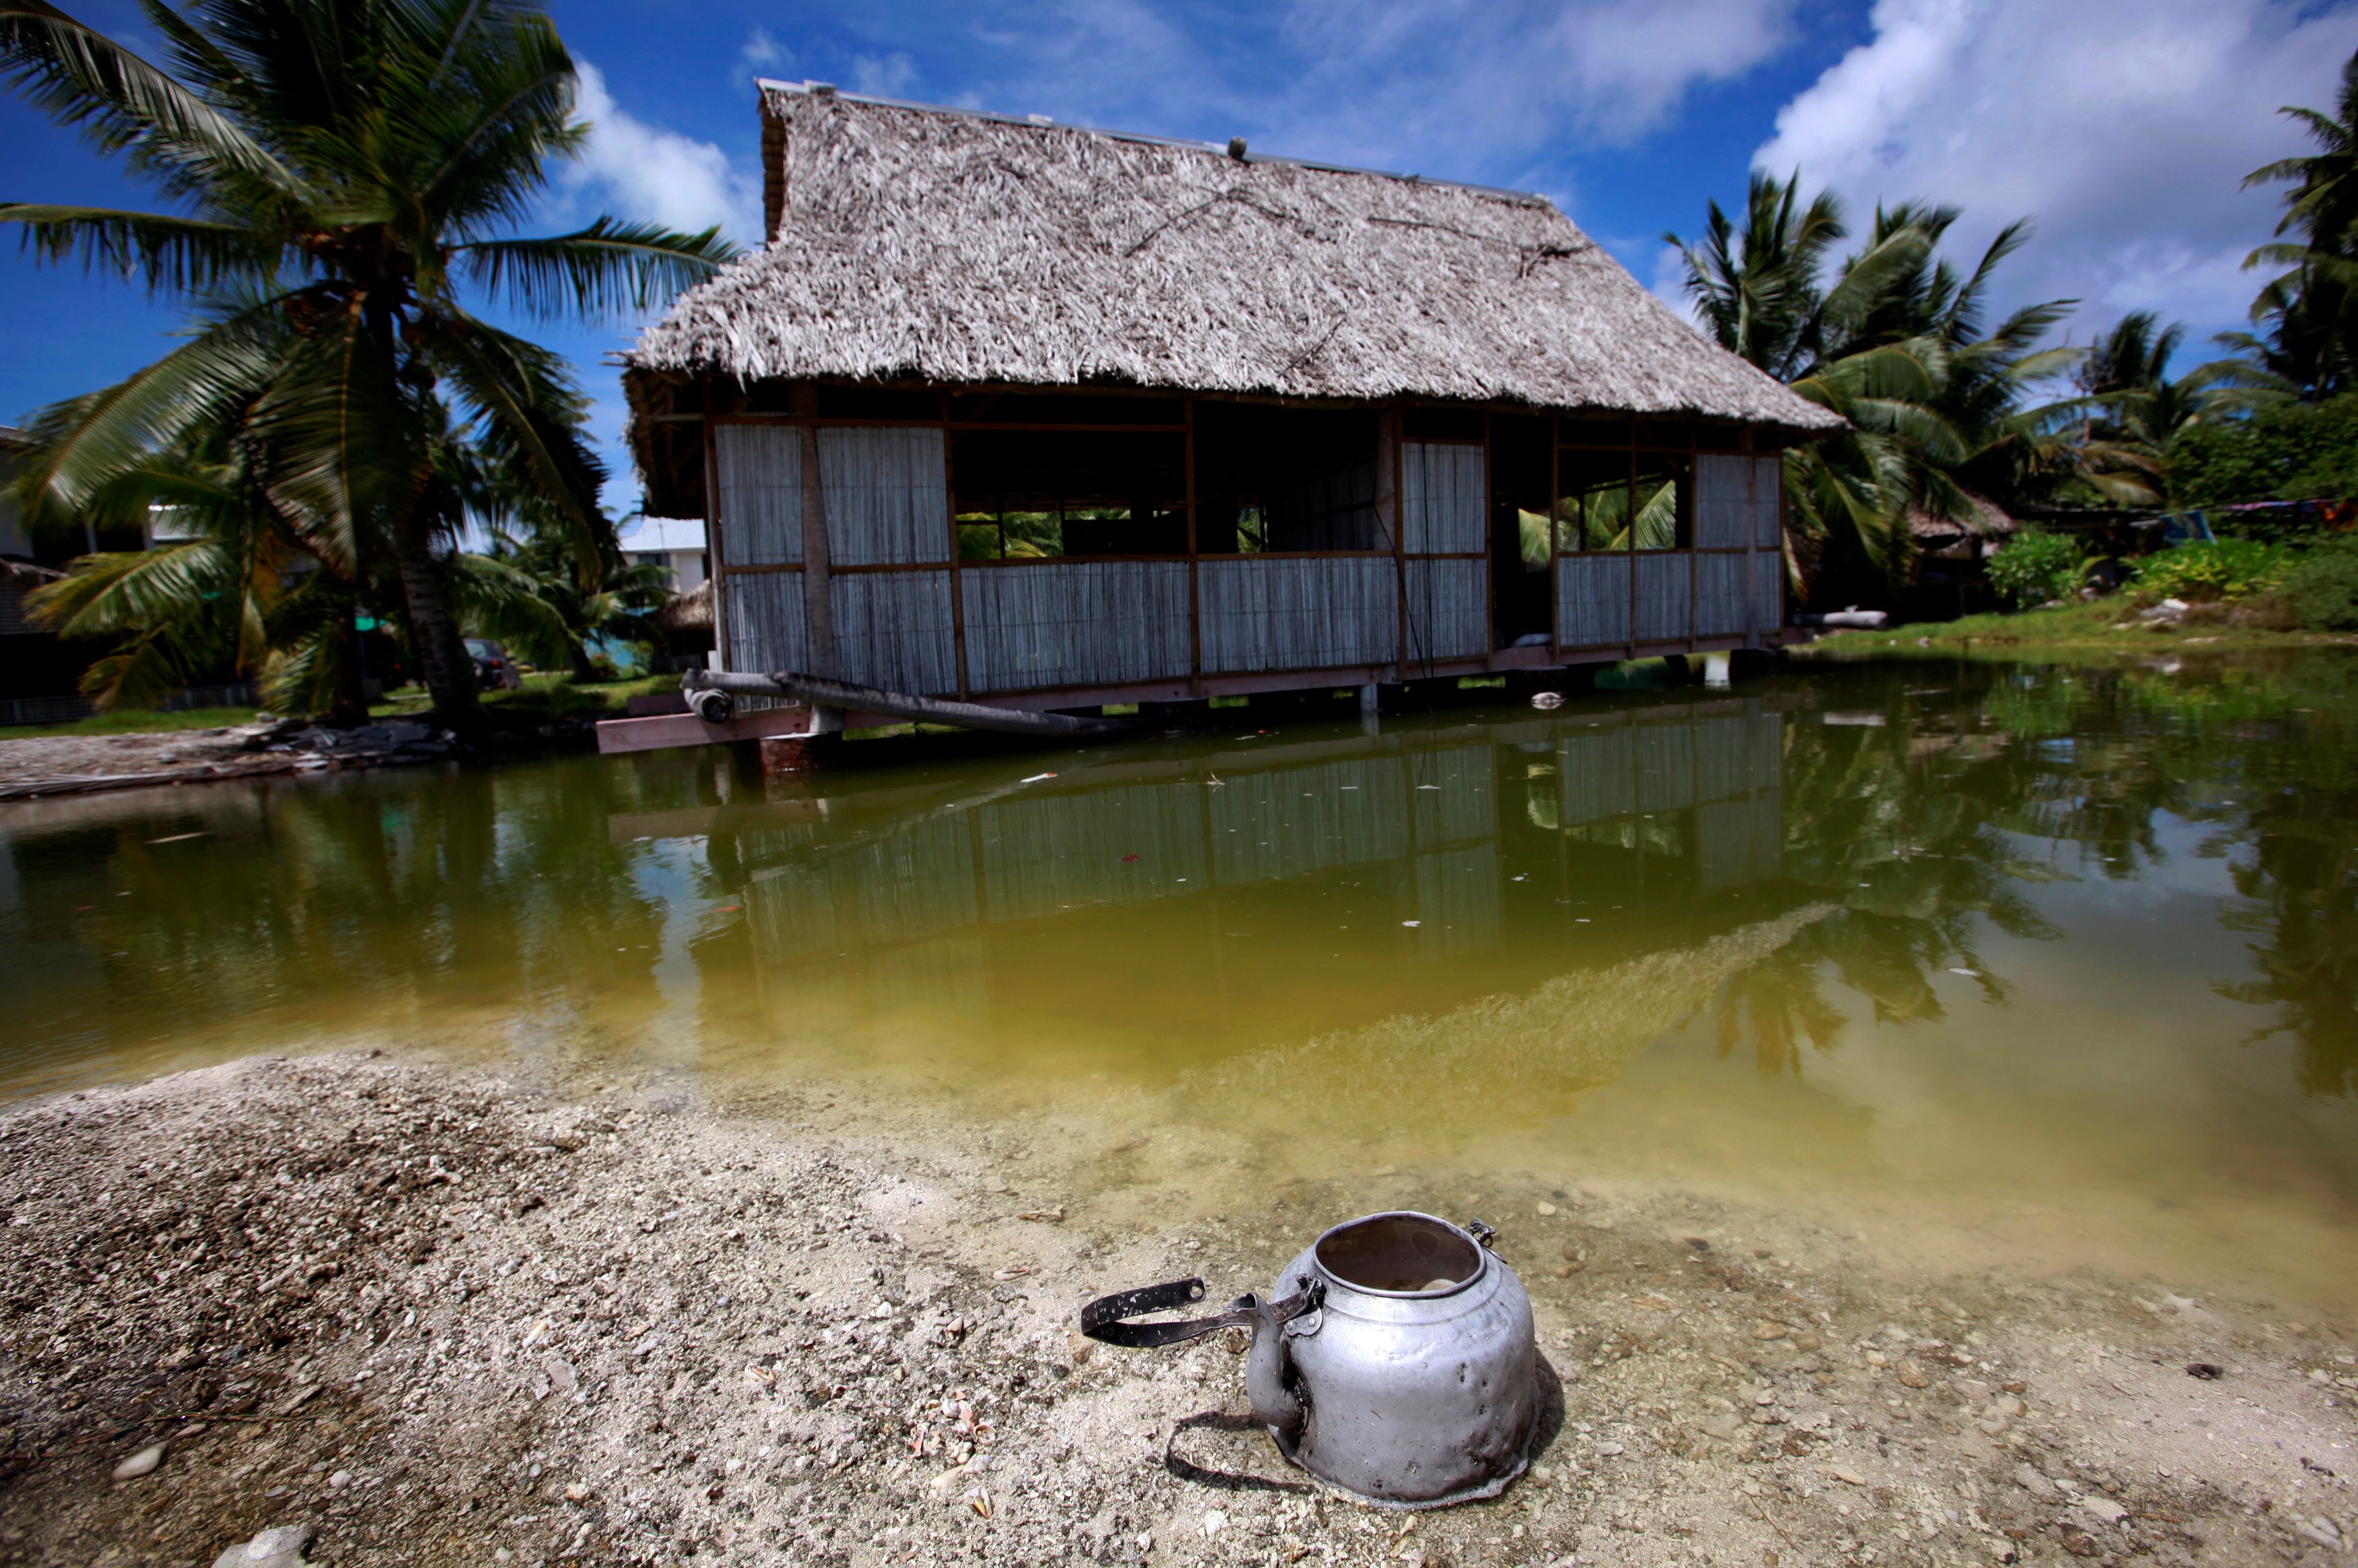 An abandoned house that is affected by seawater during high-tides stands next to a small lagoon near the village of Tangintebu on South Tarawa in the central Pacific island nation of Kiribati May 25, 2013. REUTERS/David Gray